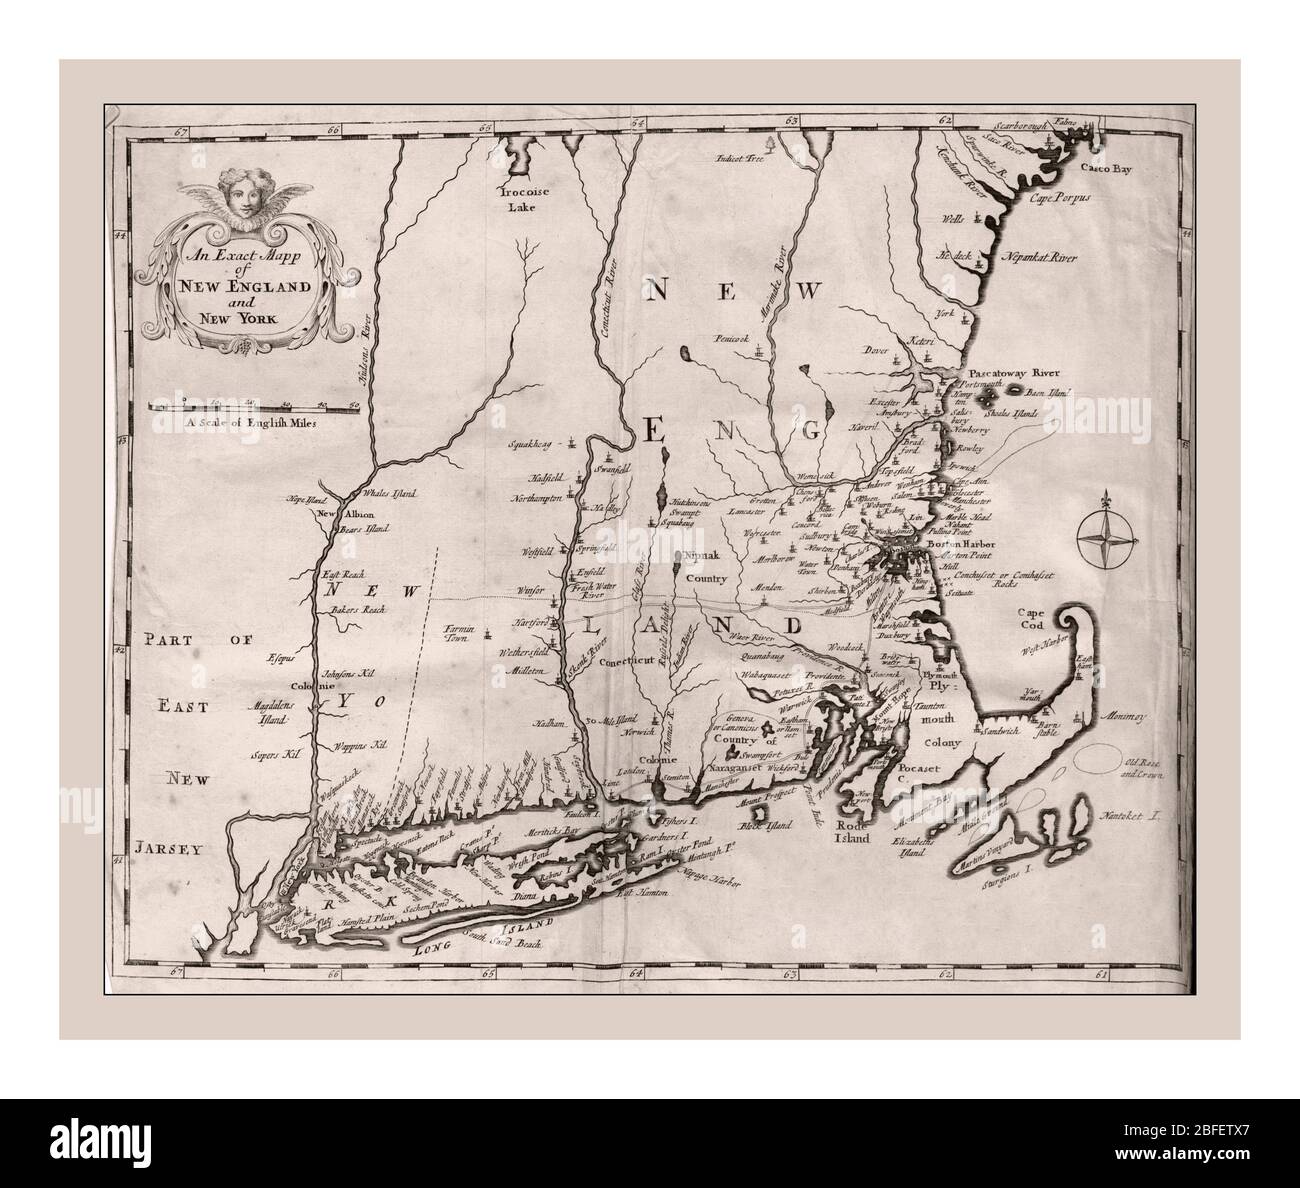 Vintage 1702 America USA  Map of eastern seaboard -New England and New York of the USA titled 'An Exact Mapp of New England and New York.' artwork by Cotton Mather (American minister and author, 1663-1728) 1702 New England --History --Colonial period, ca. 1600-1775.  Printed for Thomas Parkhurst  London 1702. Stock Photo